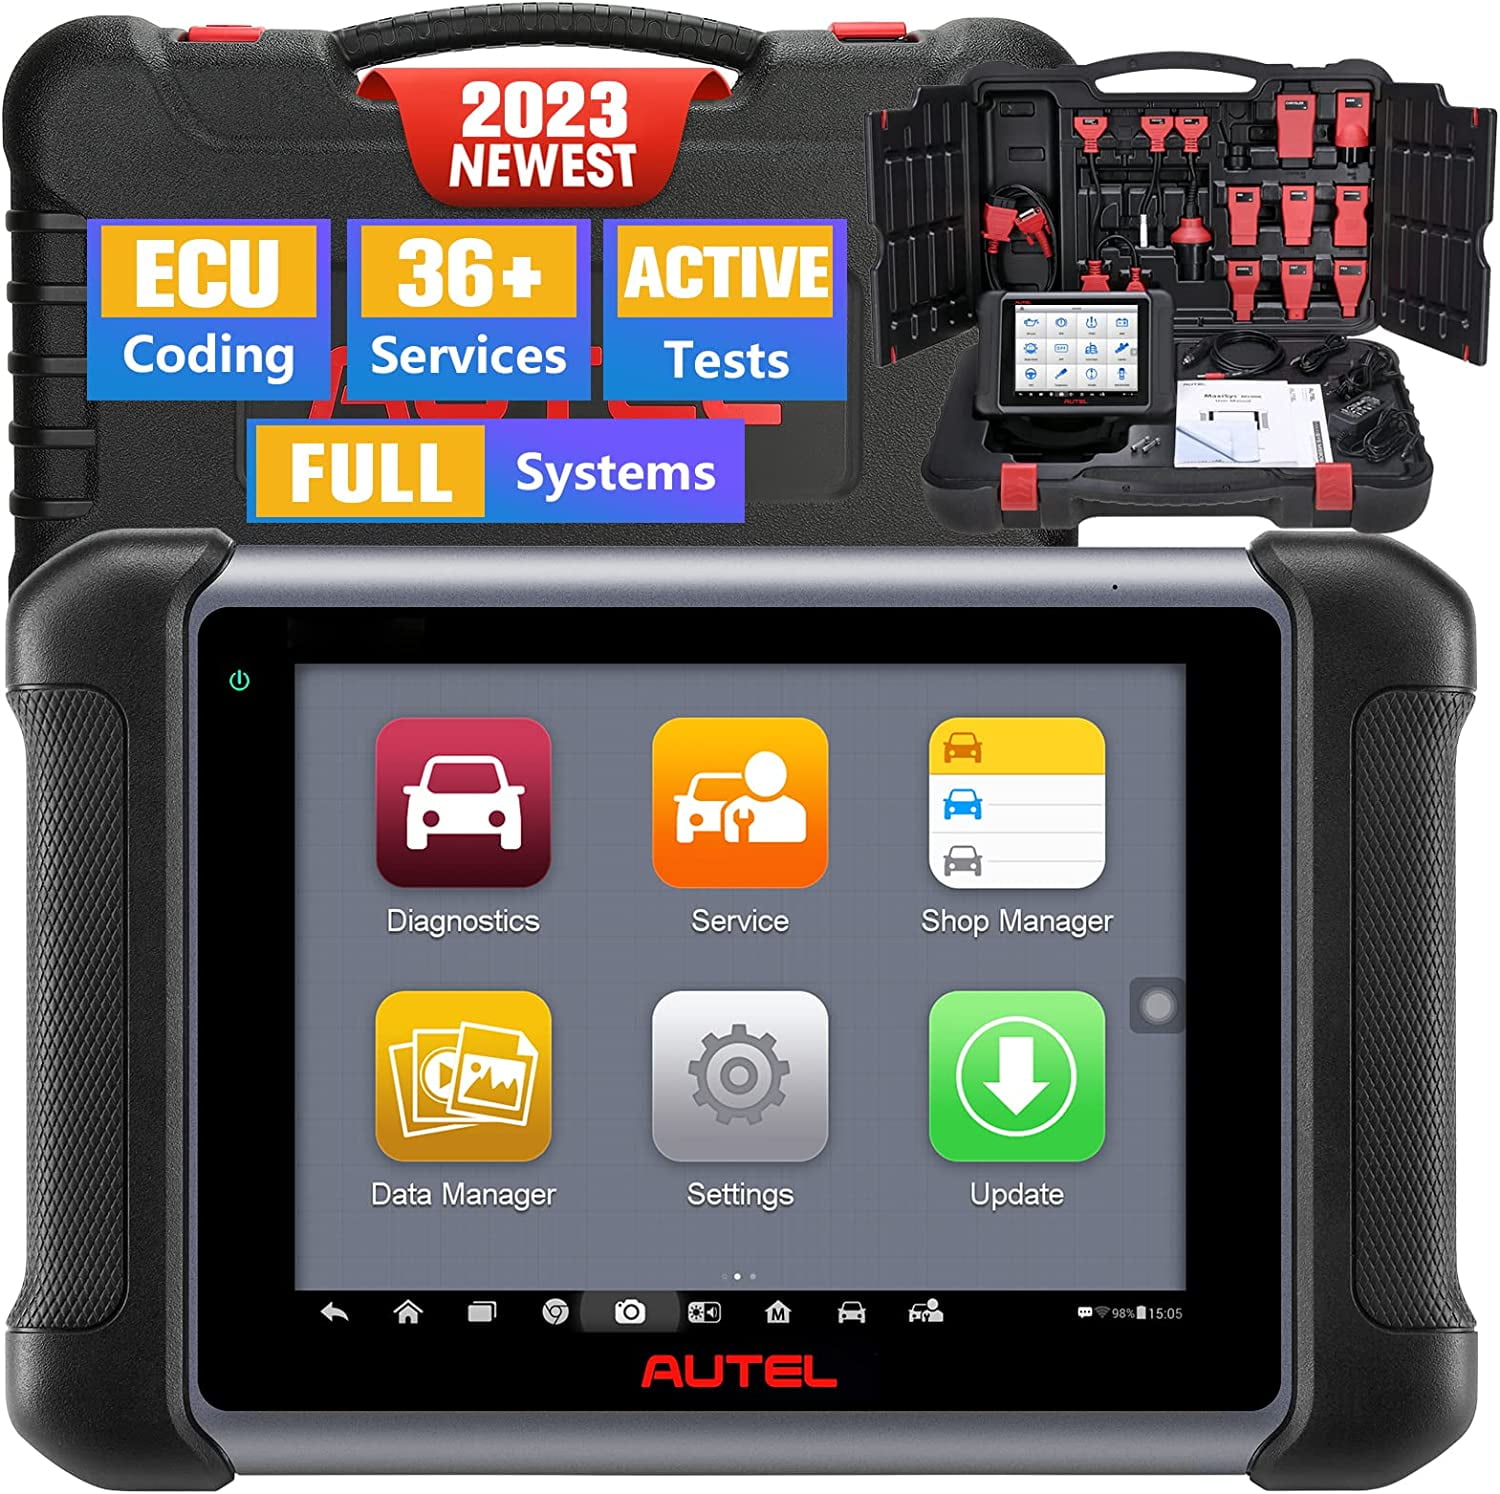 Autel Scanner Maxisys MS906 Car Diagnostic Scan Tool with ECU Coding, Key  Coding,31+ Service, FCA Autoauth Updated of MaxiPRO MP808BT Pro, MP808K 